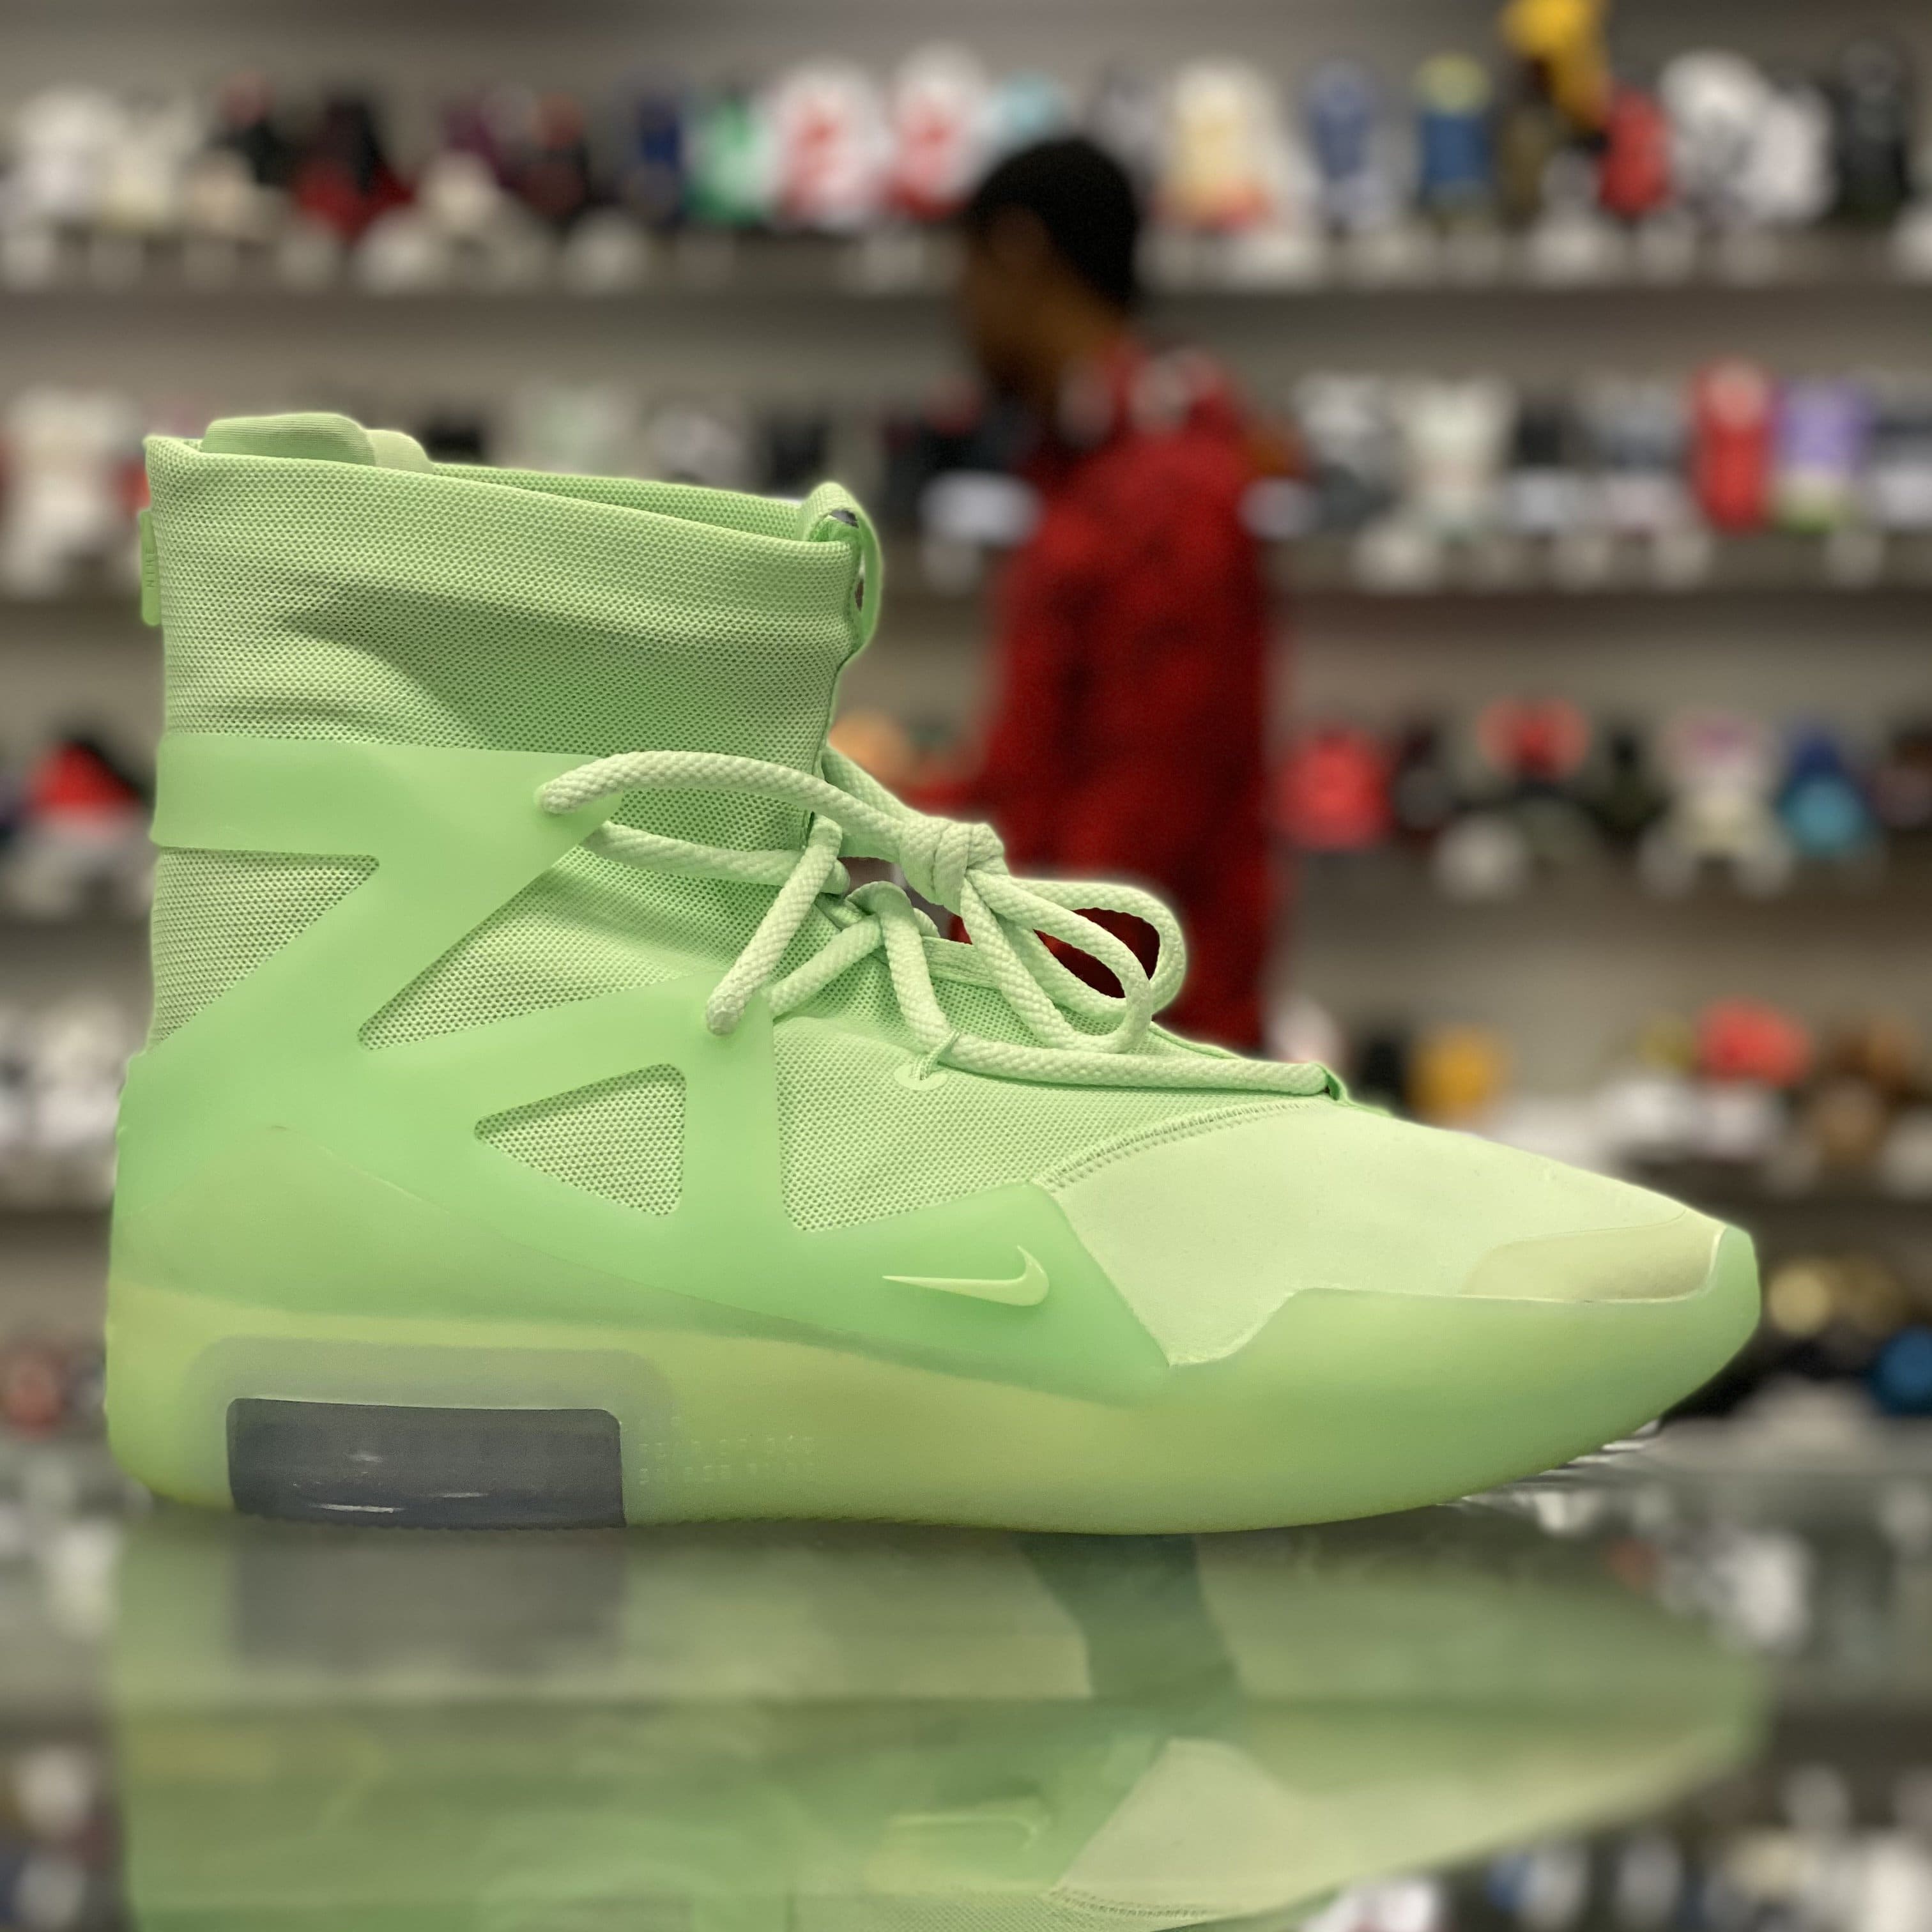 Air Fear of God 1 “Frosted Spruce”